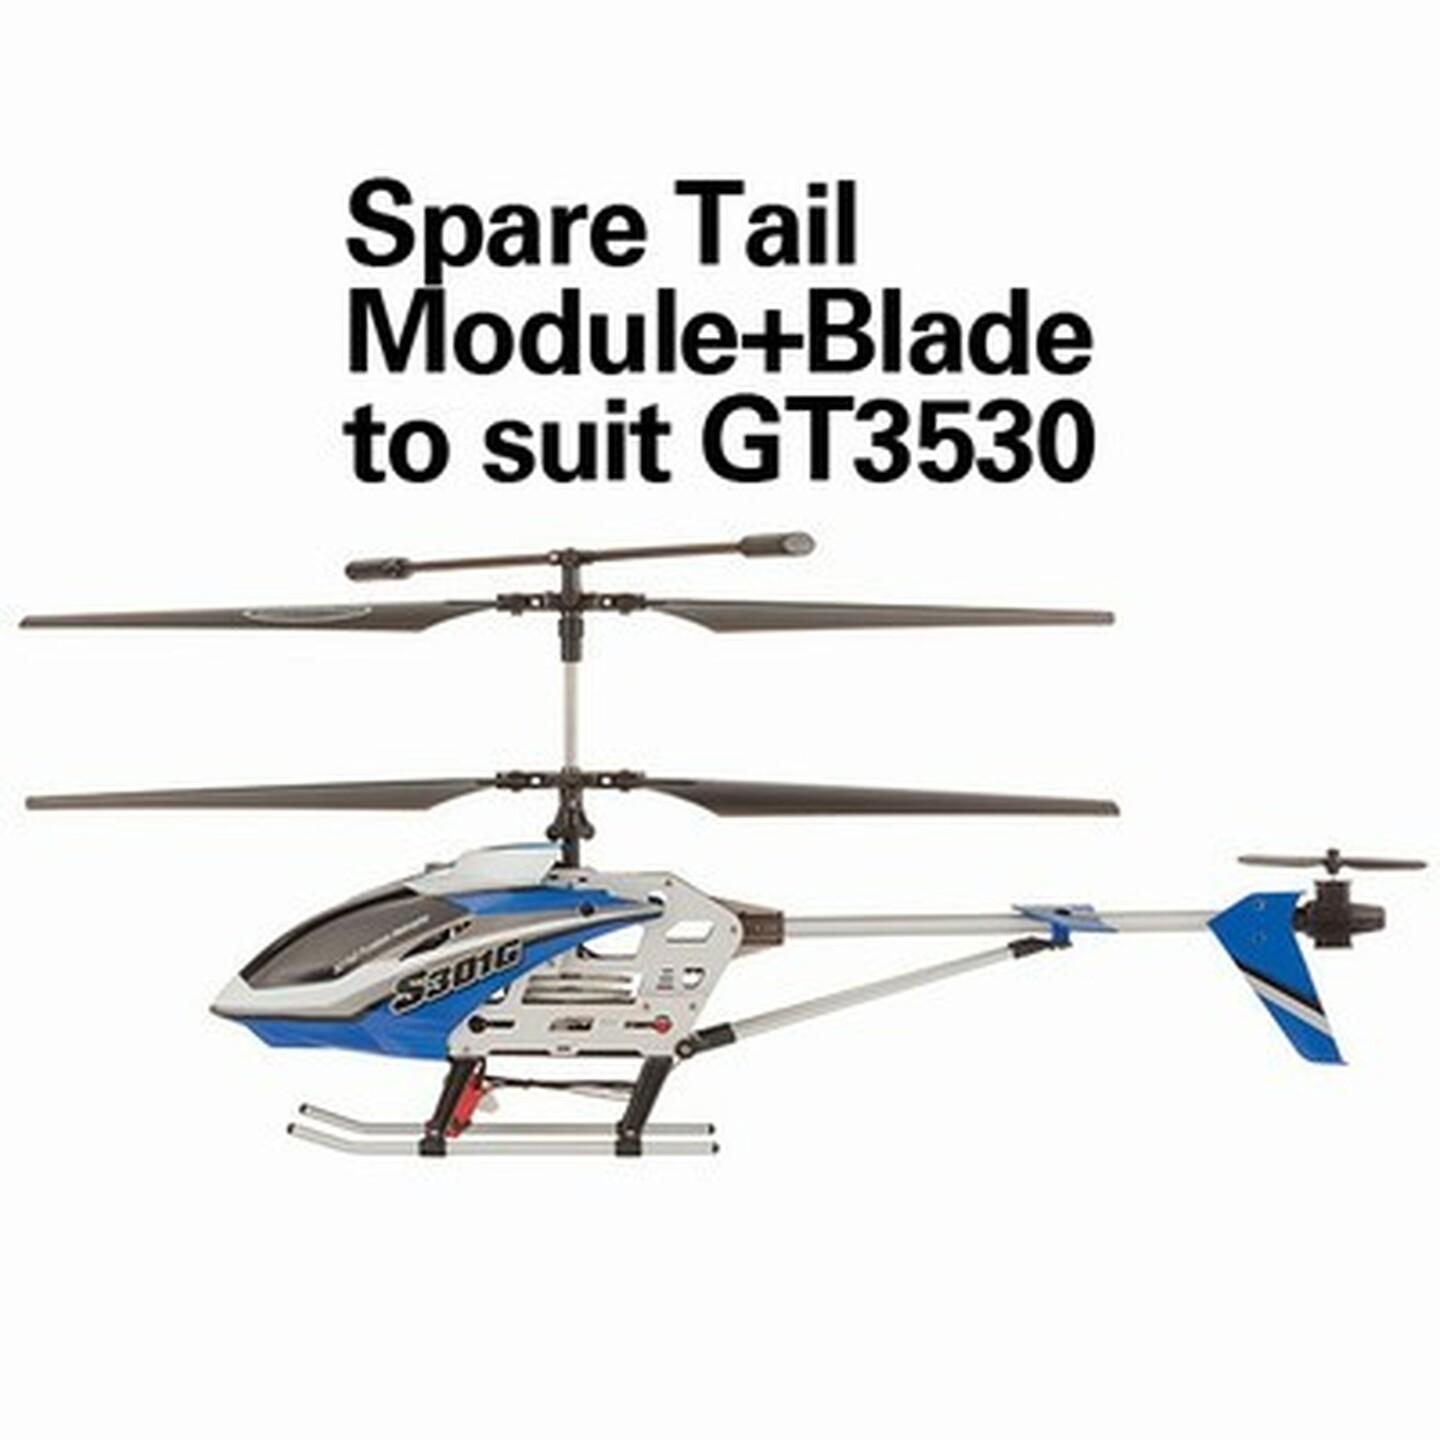 Spare Tail ModuleBlade to Suit GT3530